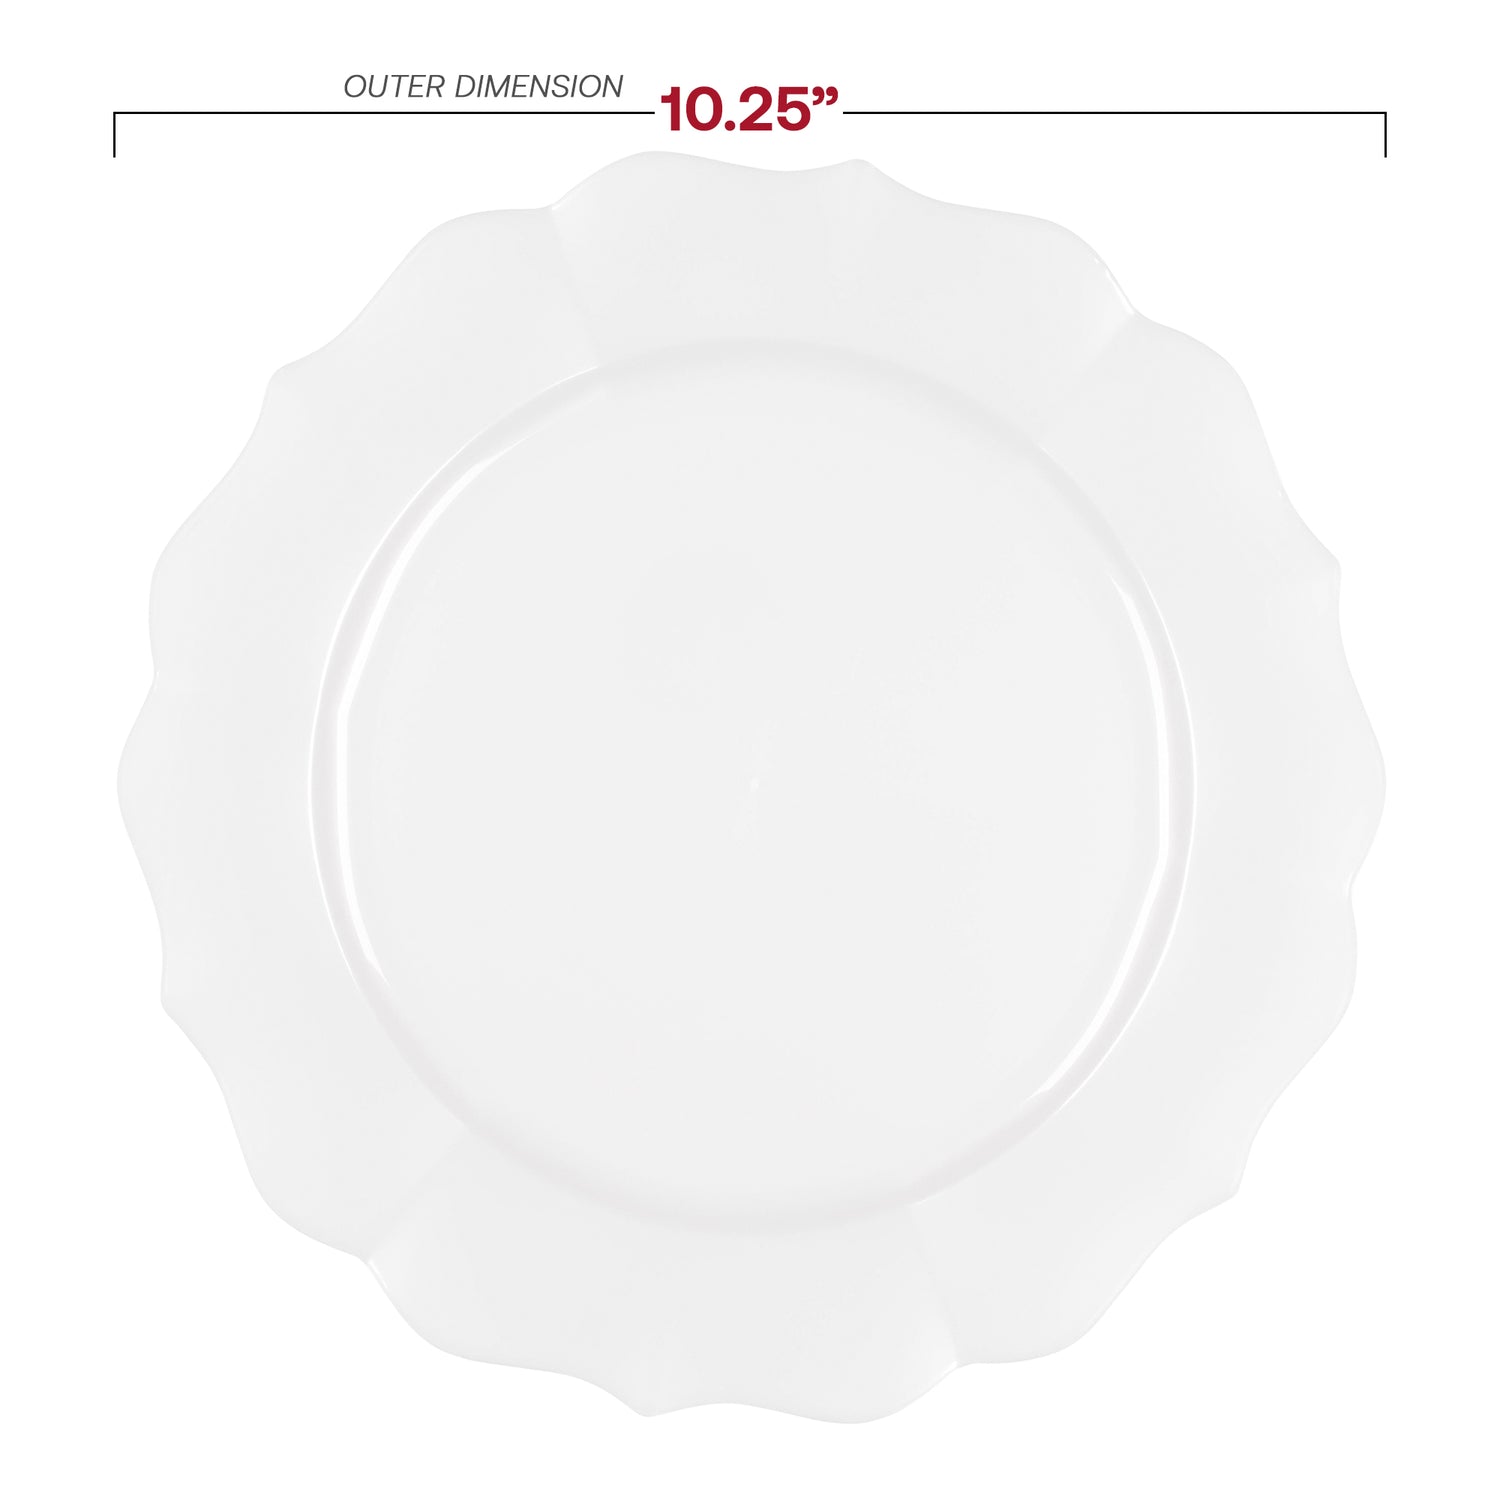 Pearl White Round Lotus Plastic Dinner Plates (10.25") Dimension | The Kaya Collection